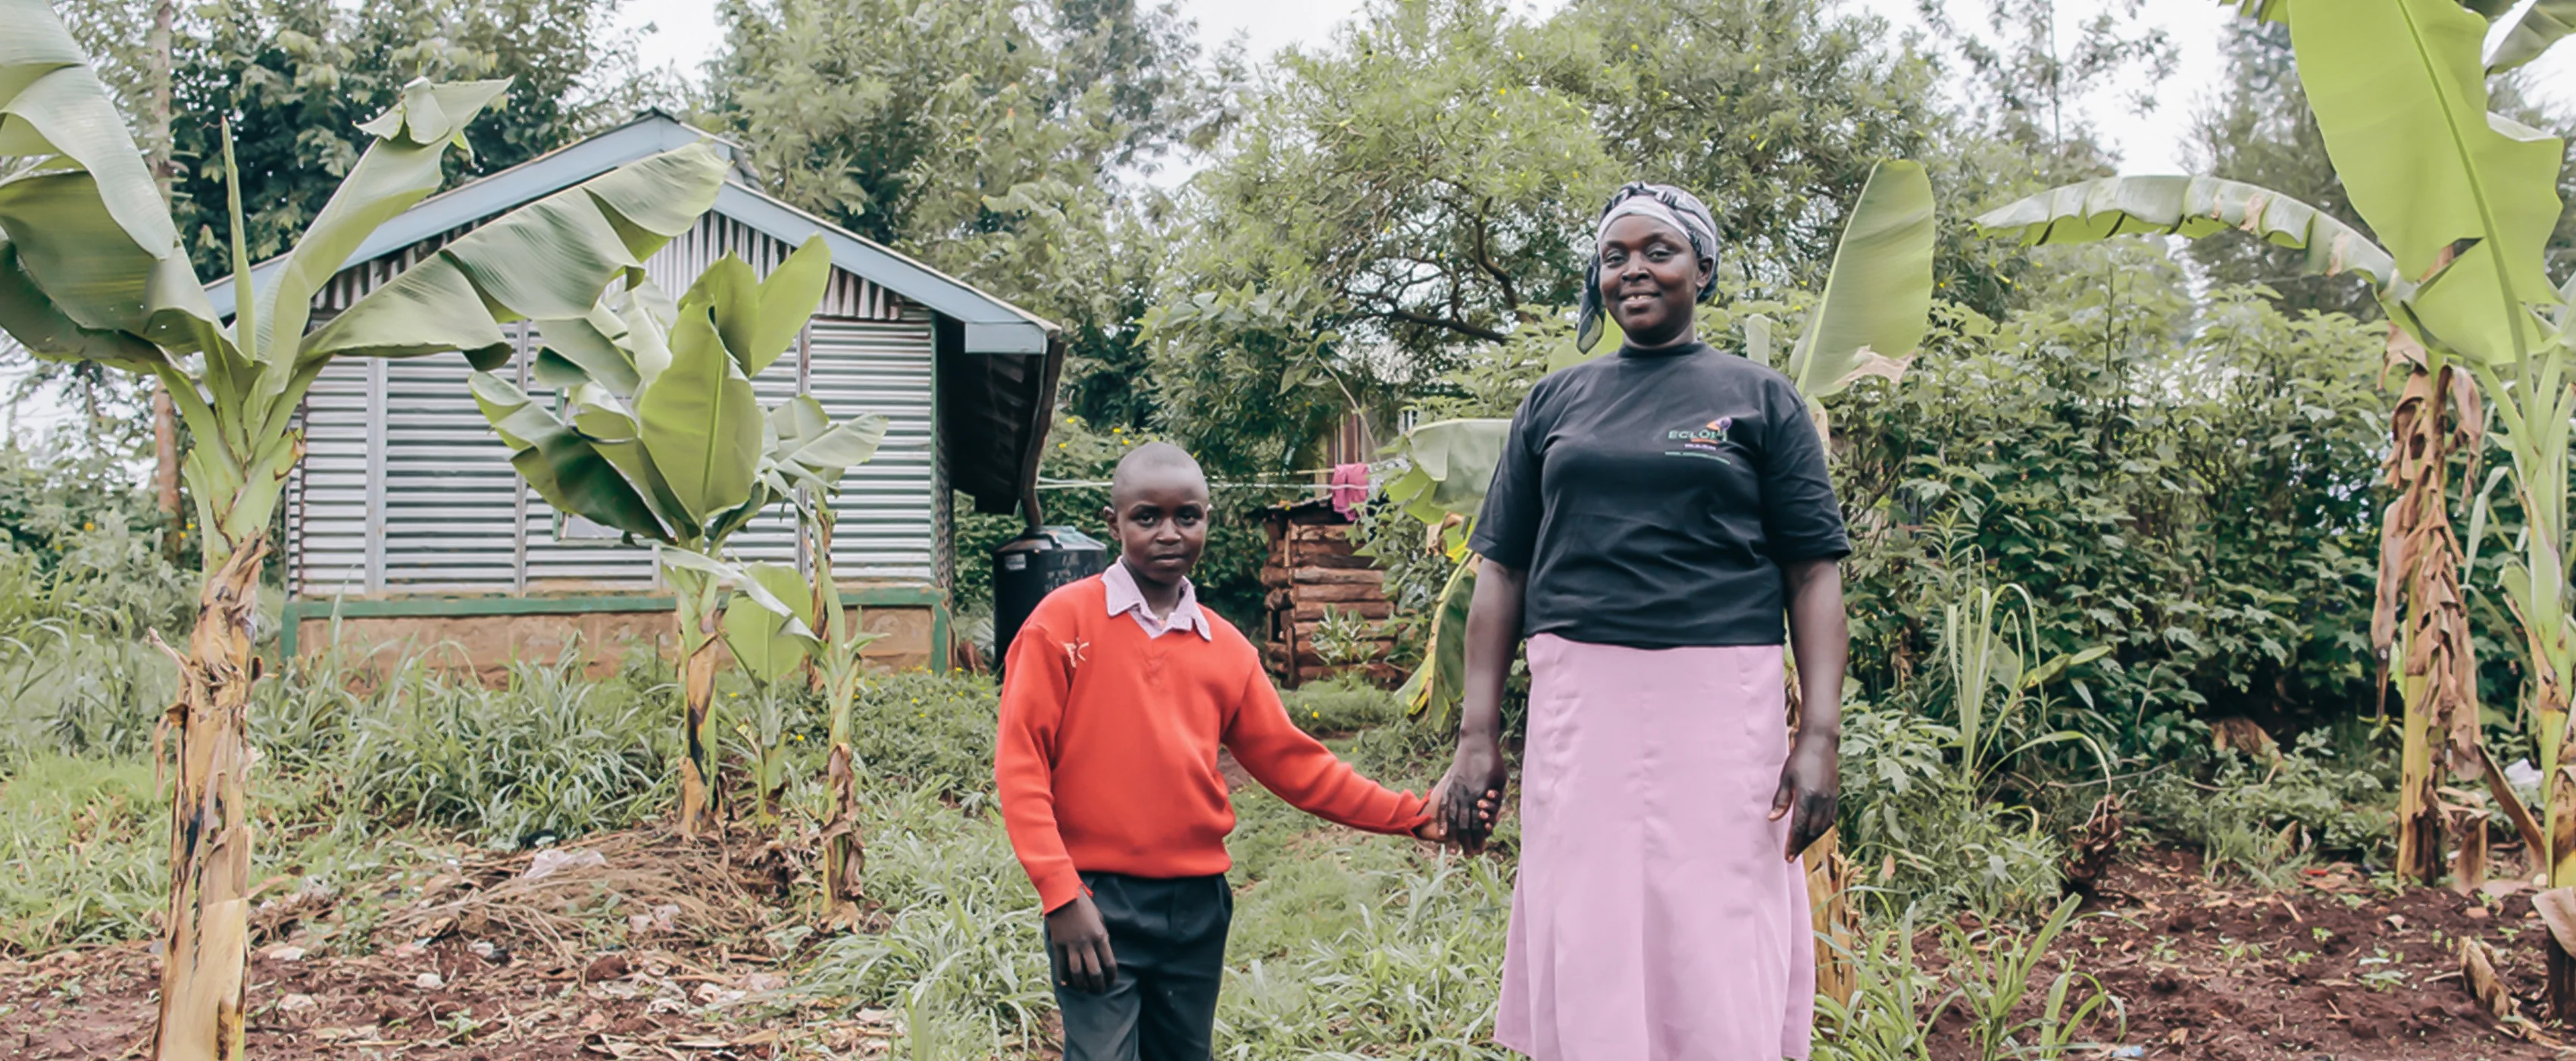 Sabina and her son at their farm in Kenya